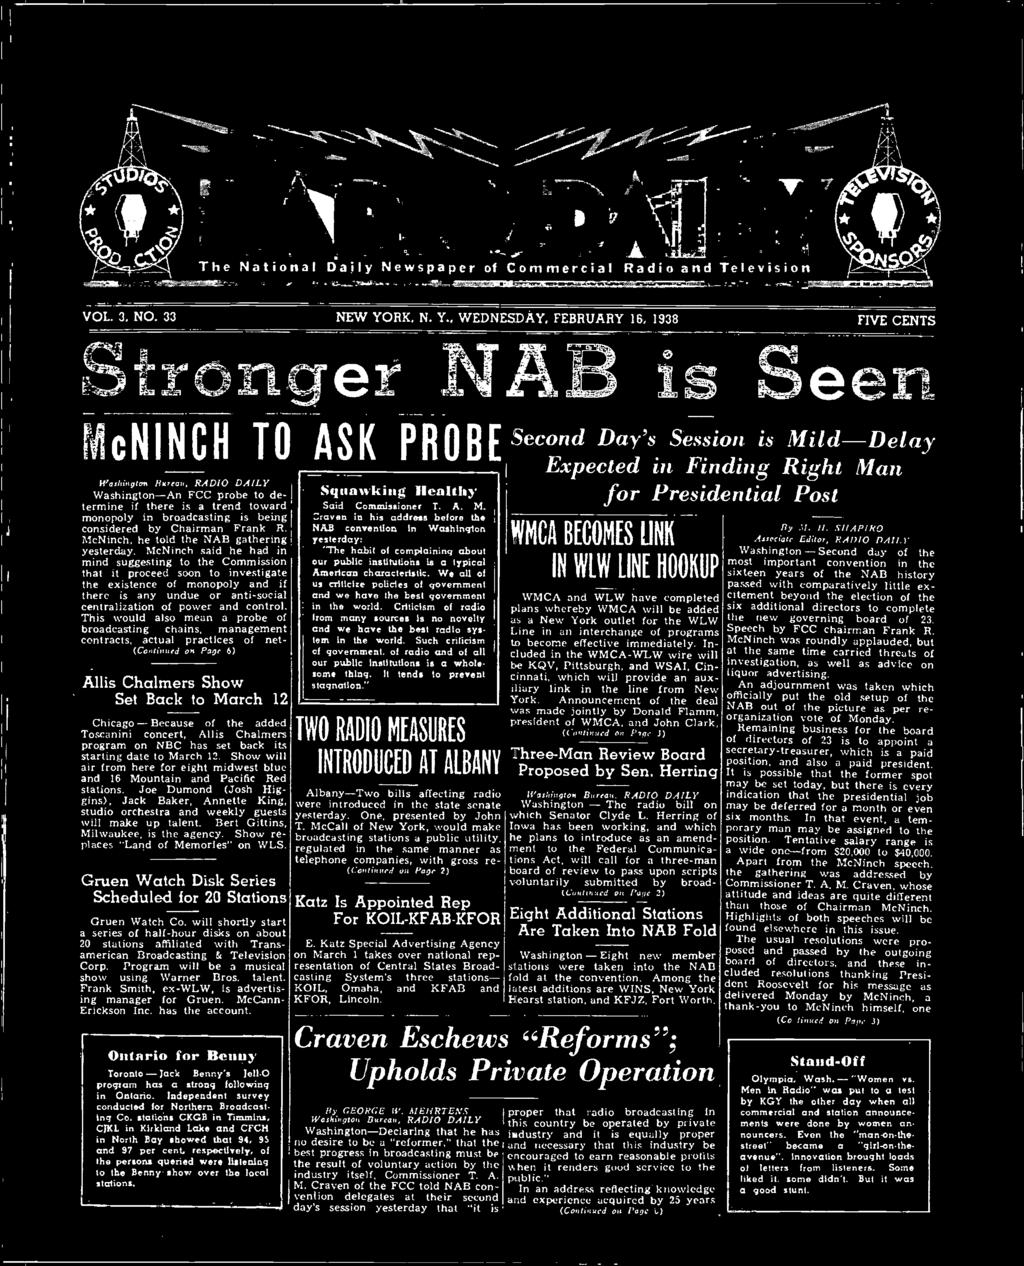 , WEDNESDAY, FEBRUARY 16, 1938 FIVE CENTS Stronger NAB is Seen McNINCH TO ASK PROBE Washington Hlt,(00, Washington-An FCC probe to determine if there is a trend toward ' monopoly in broadcasting is